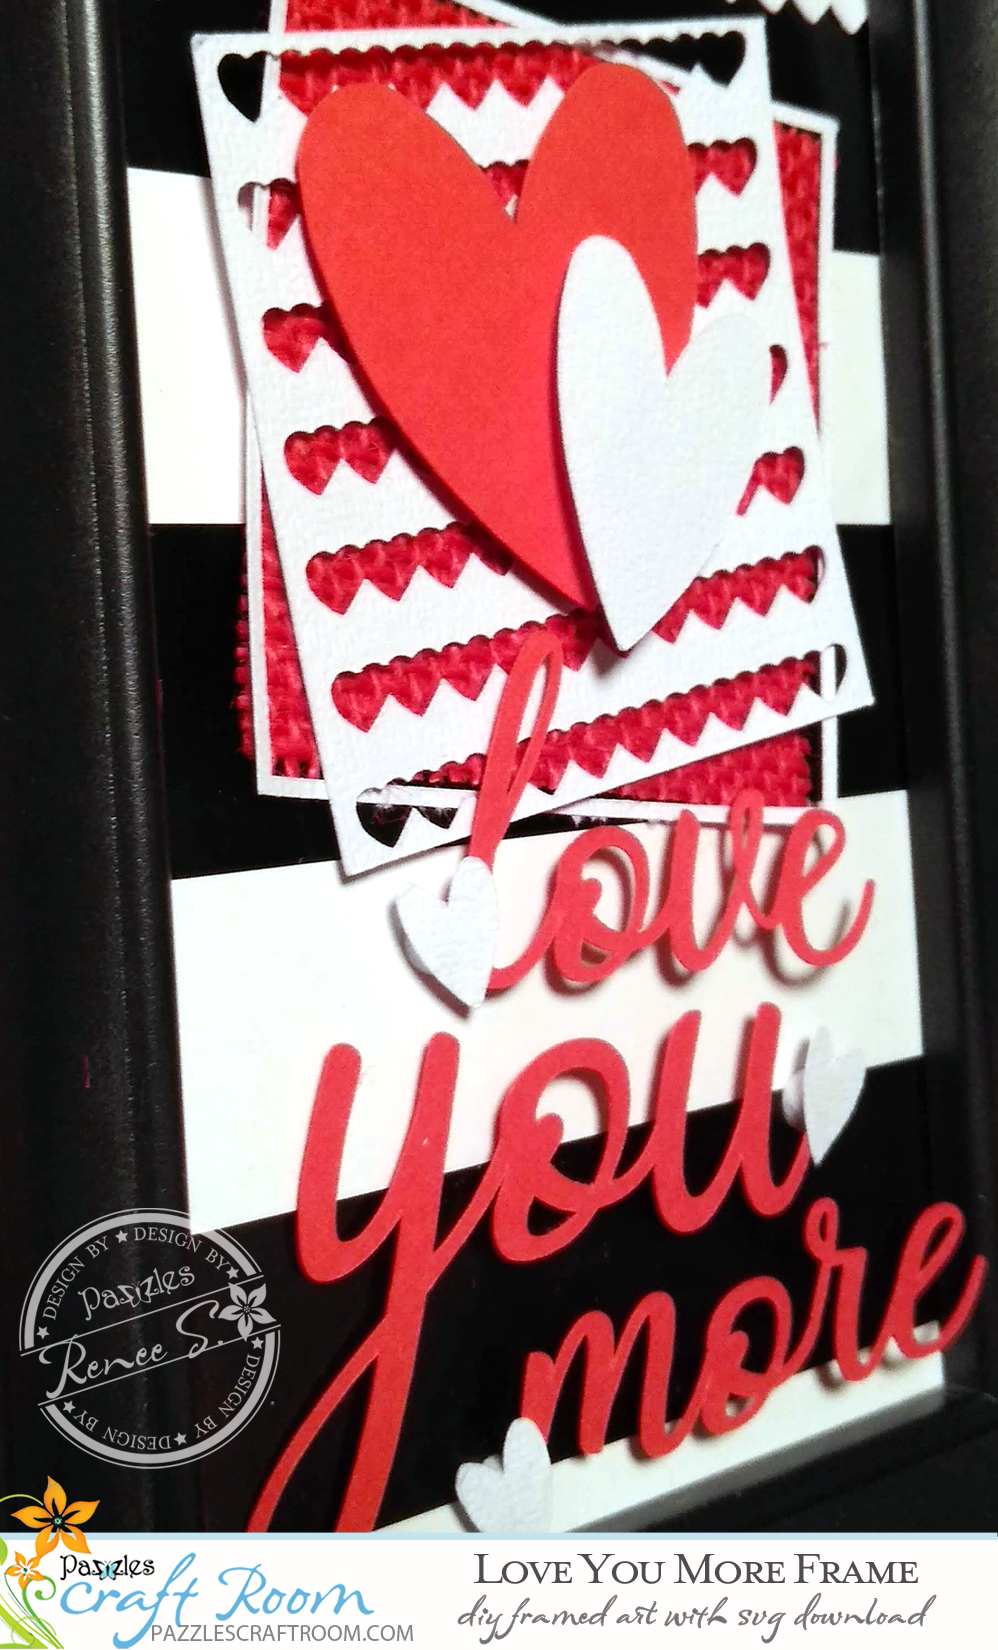 Pazzles DIY Love You More Frame or Card with instant SVG download. Compatible with all major electronic cutters including Pazzles Inspiration, Cricut, and Silhouette Cameo. Design by Renee Smart.